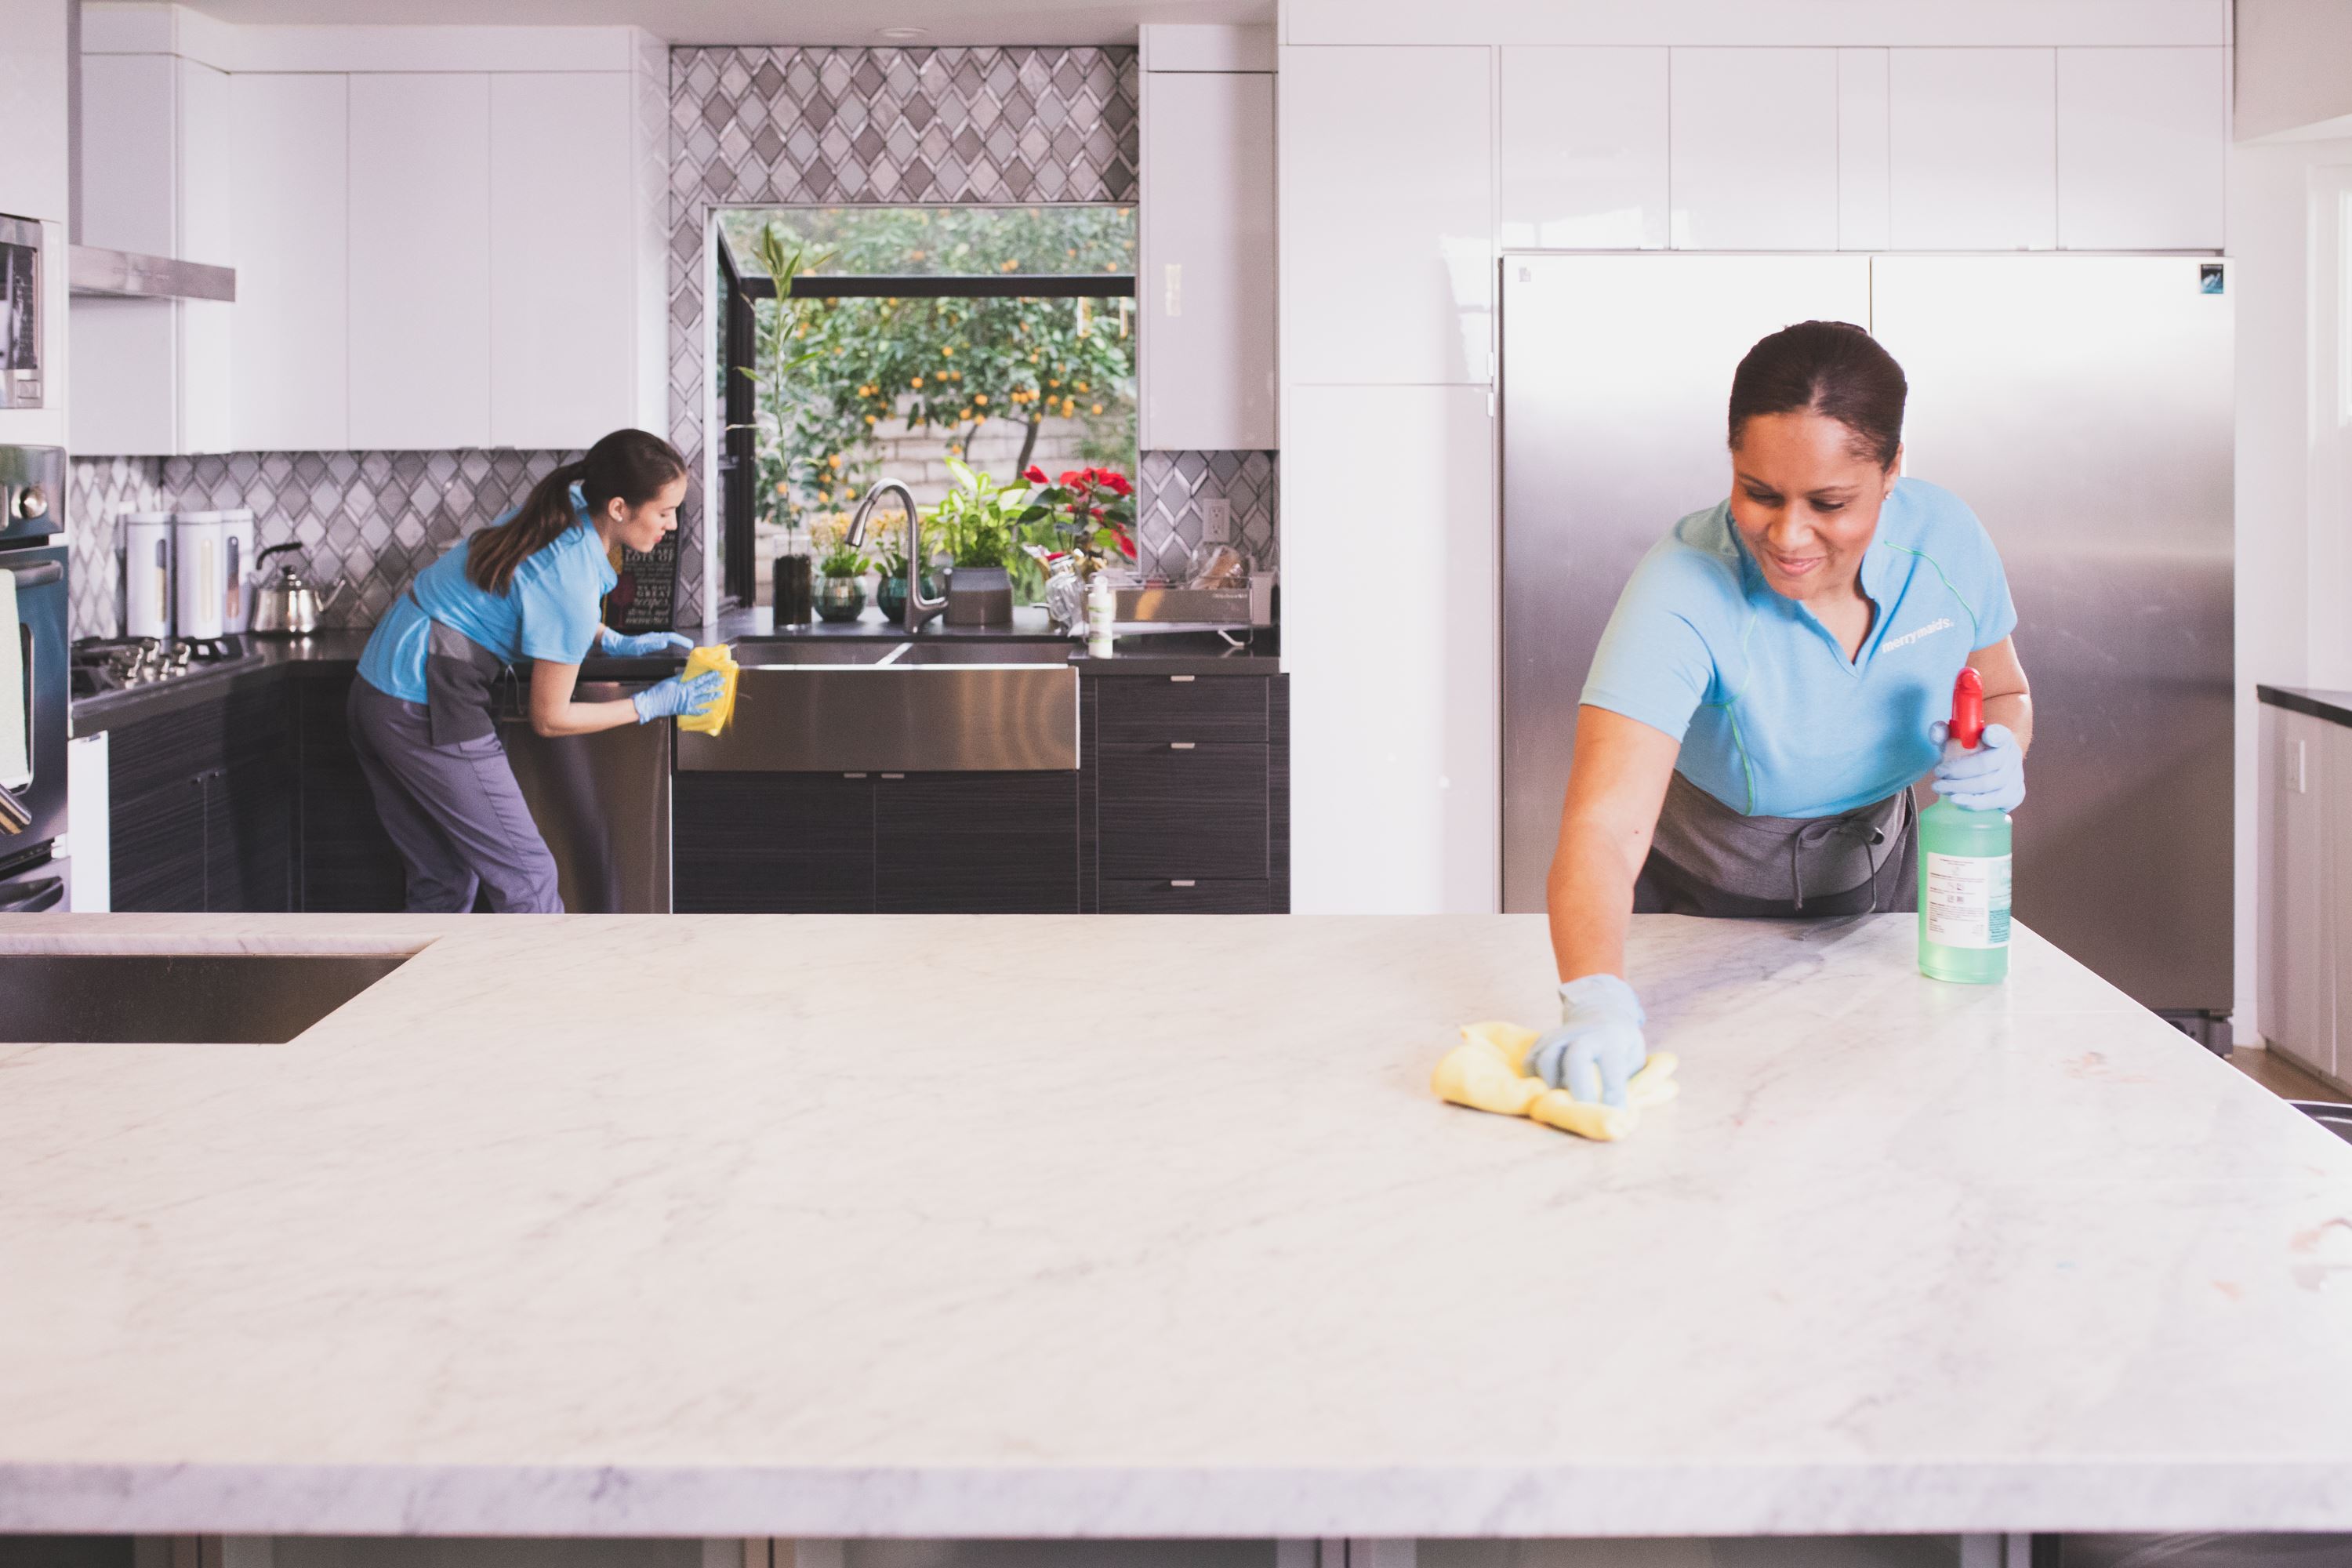 House cleaning from Merry Maids of San Antonio experts 